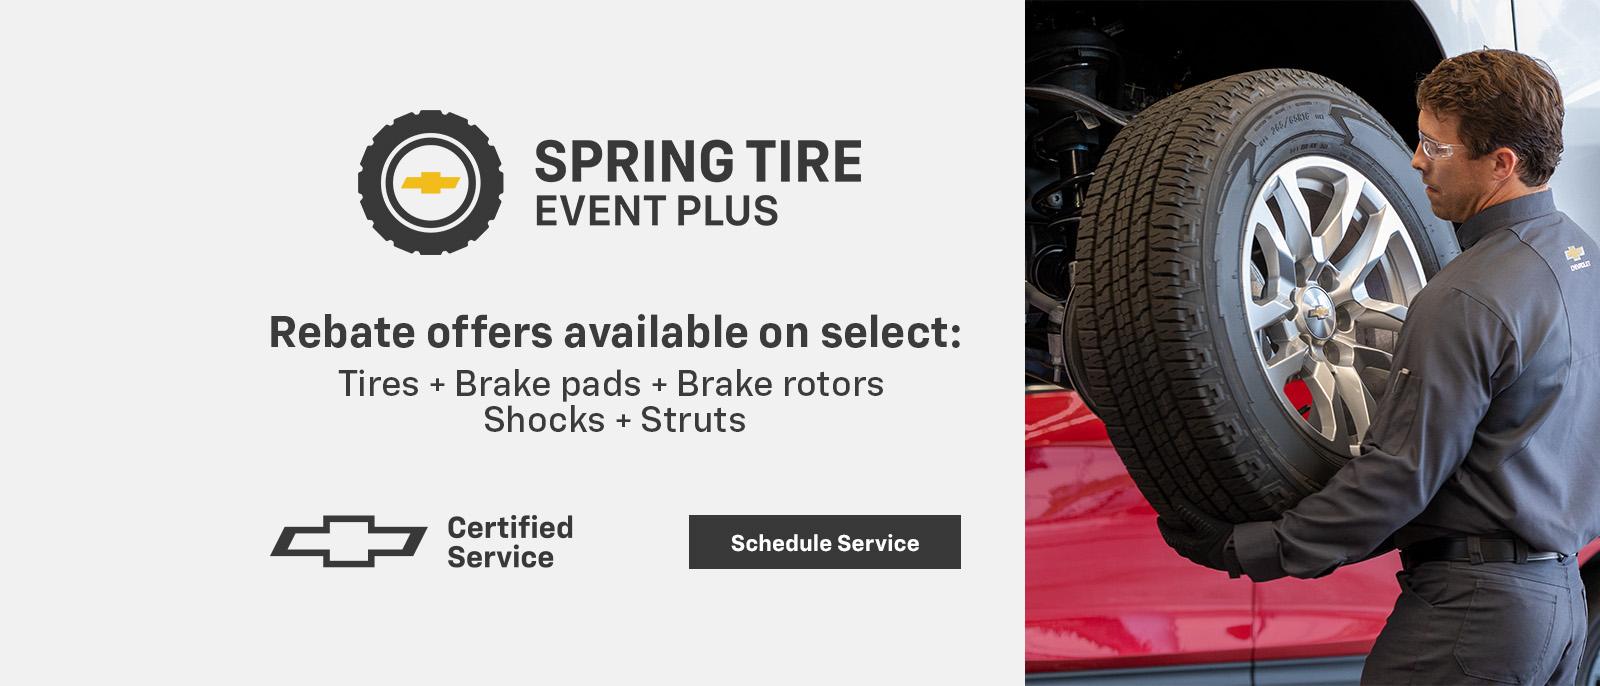 Rebates available on select tires and more.